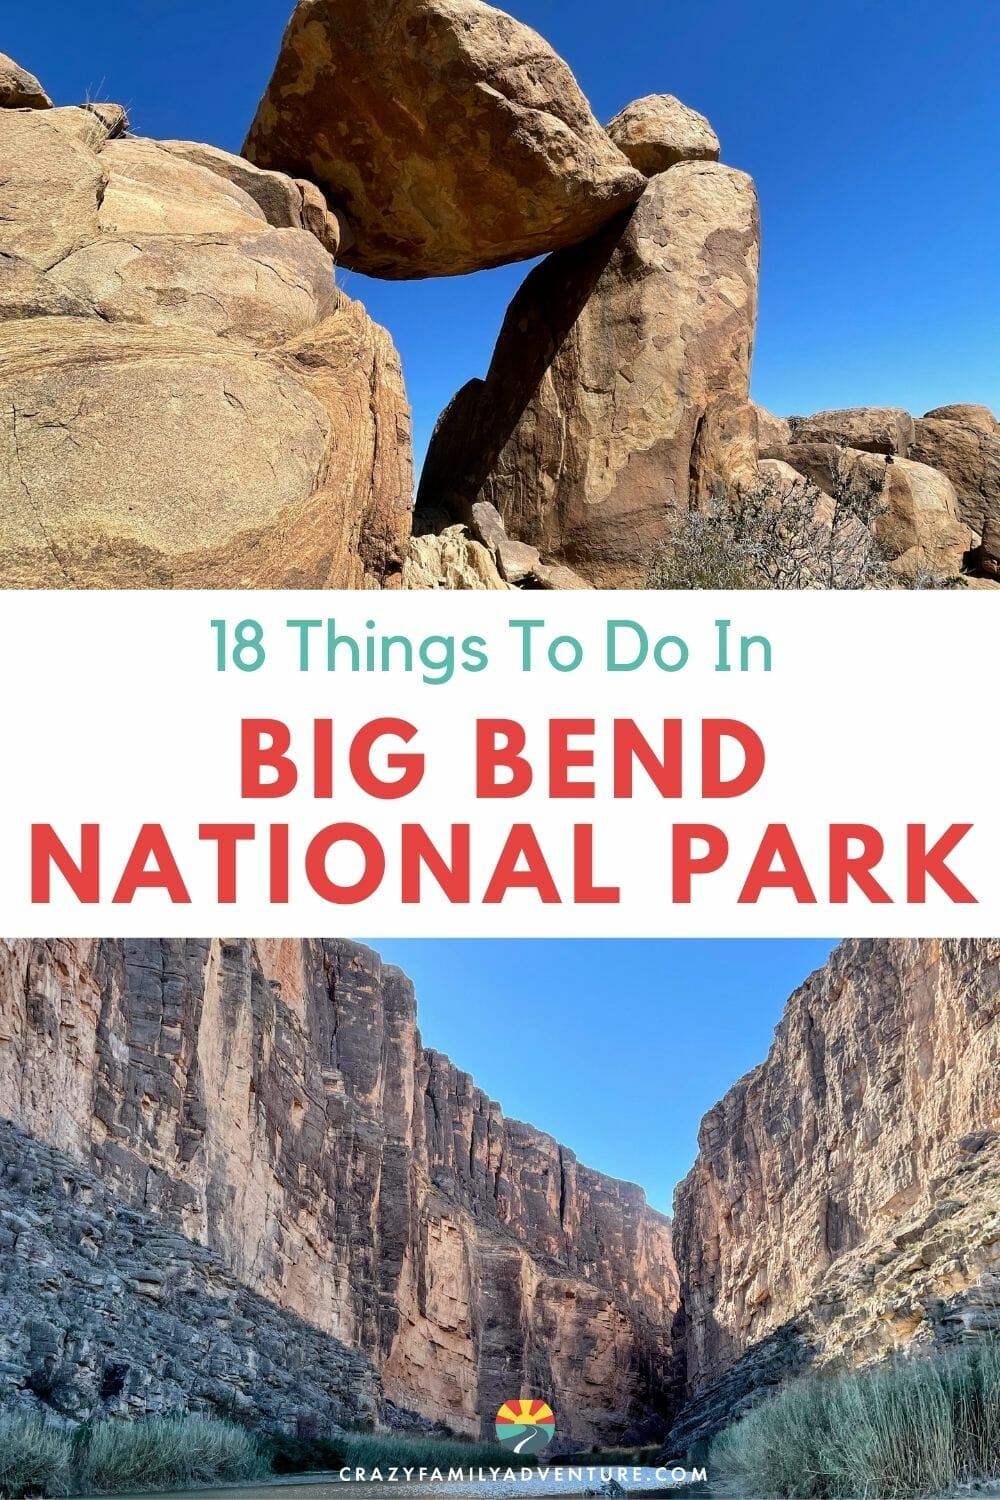 There are so many things to do in Big Bend National Park. If you're looking for a place with scenic beauty and small crowds, Big Bend it is.